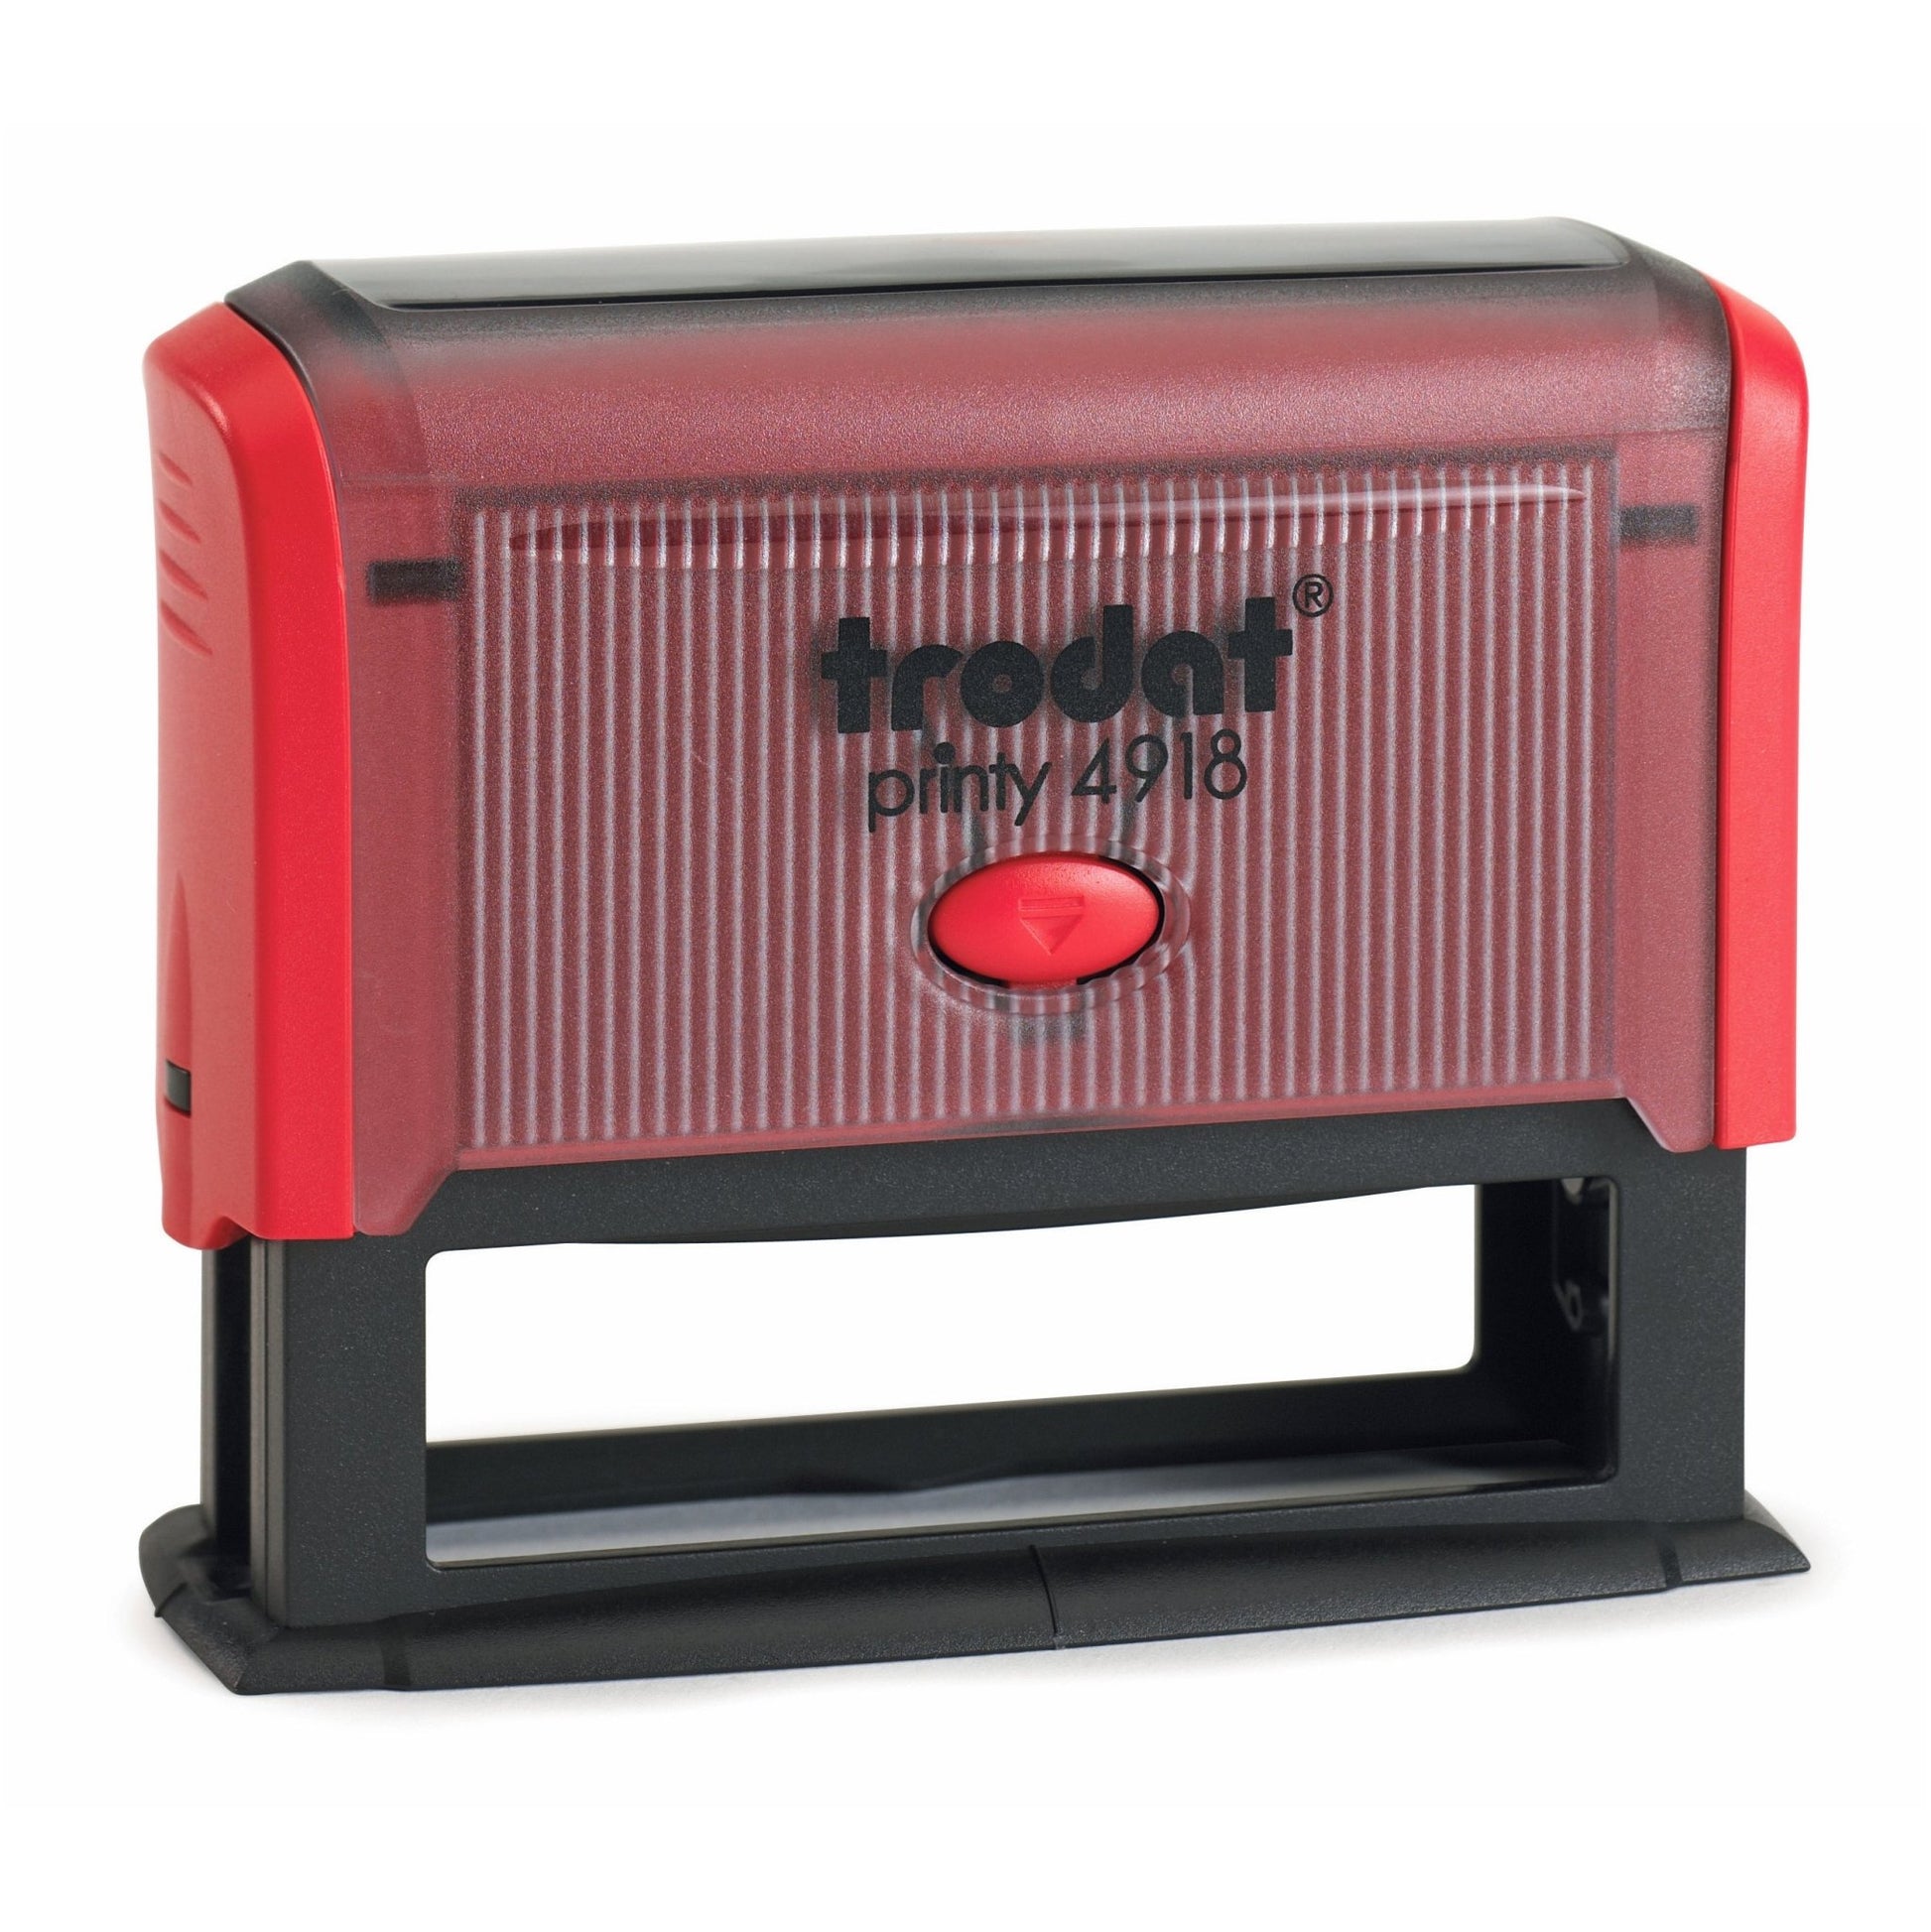 75 x 18mm - Premium Personalised Custom Made Self-Inking Rubber Stamp - Up to 2 Lines of Customised Text